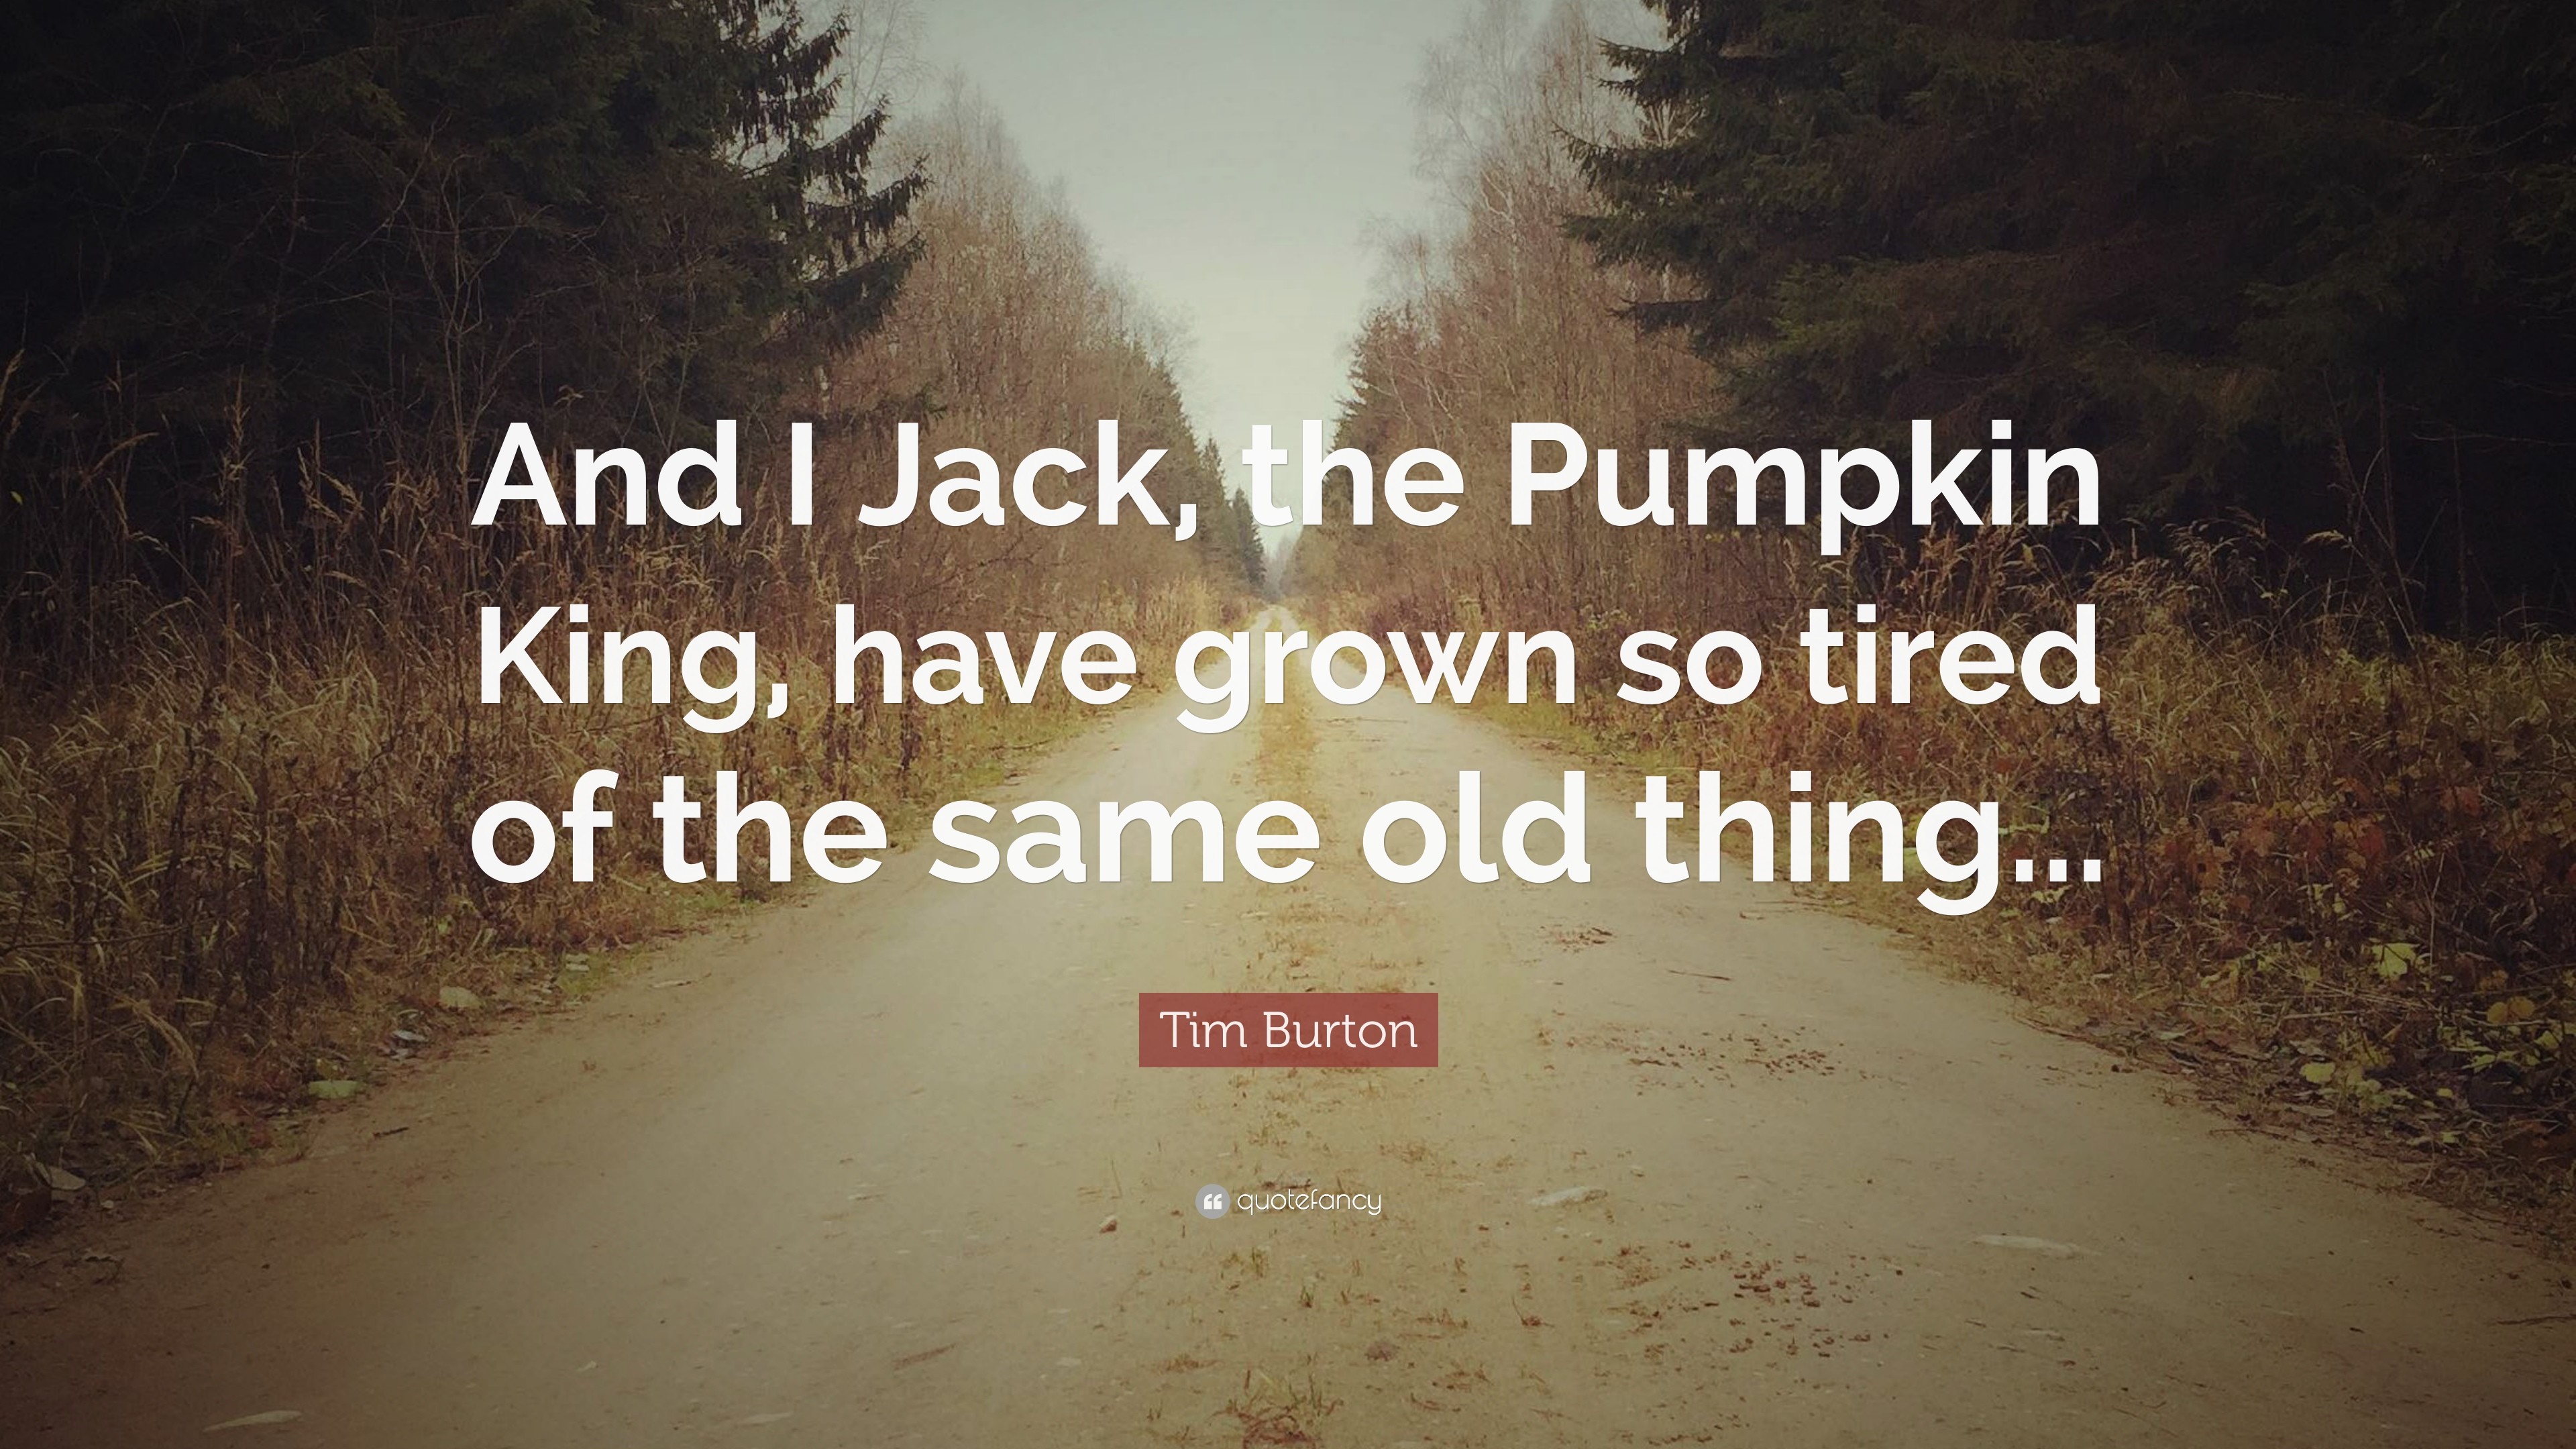 3840x2160 Tim Burton Quote: “And I Jack, the Pumpkin King, have grown so